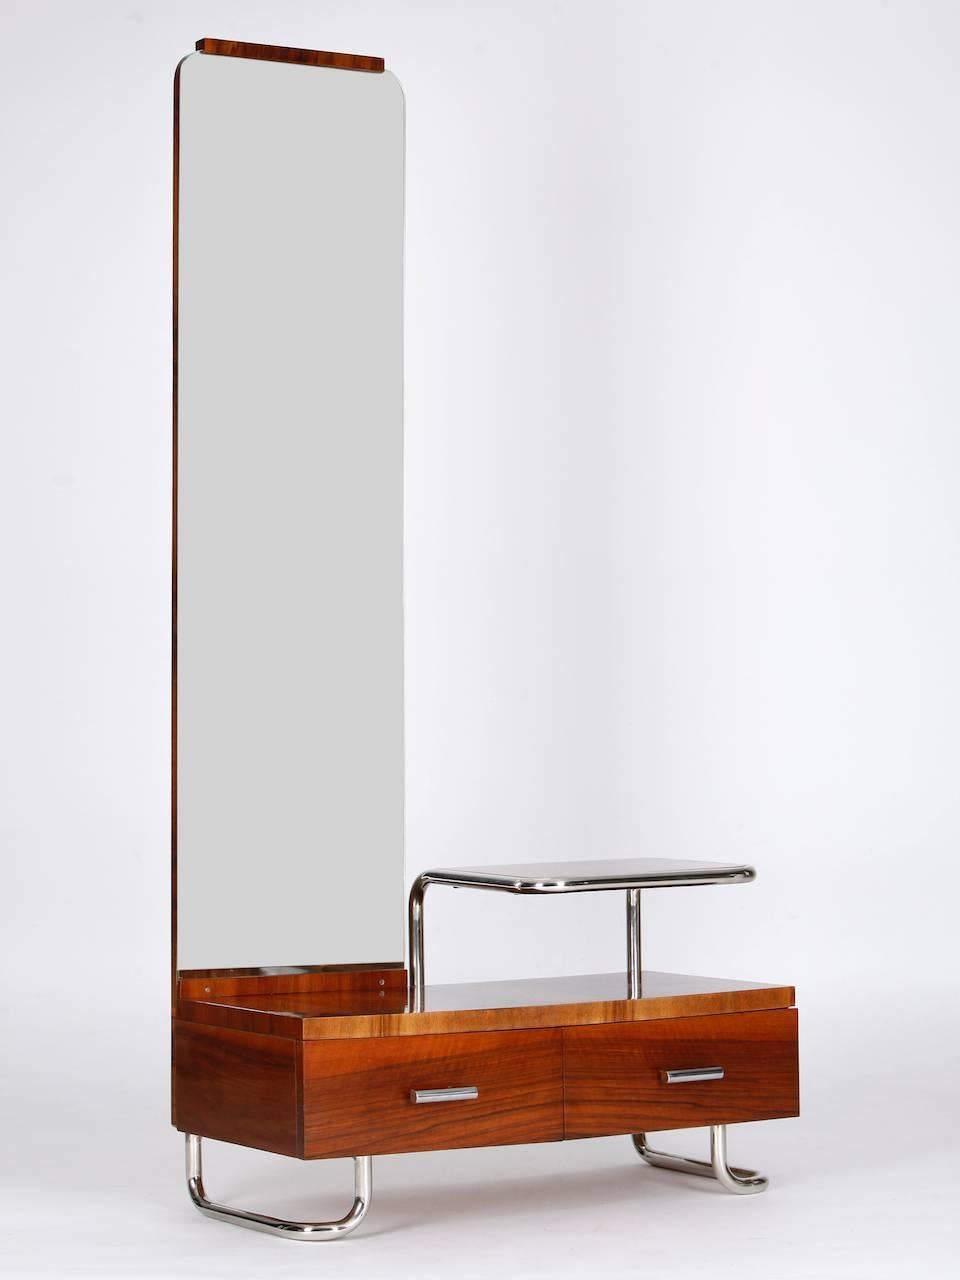 Tubular Steel Dressing Table from the, 1930s (Art déco)